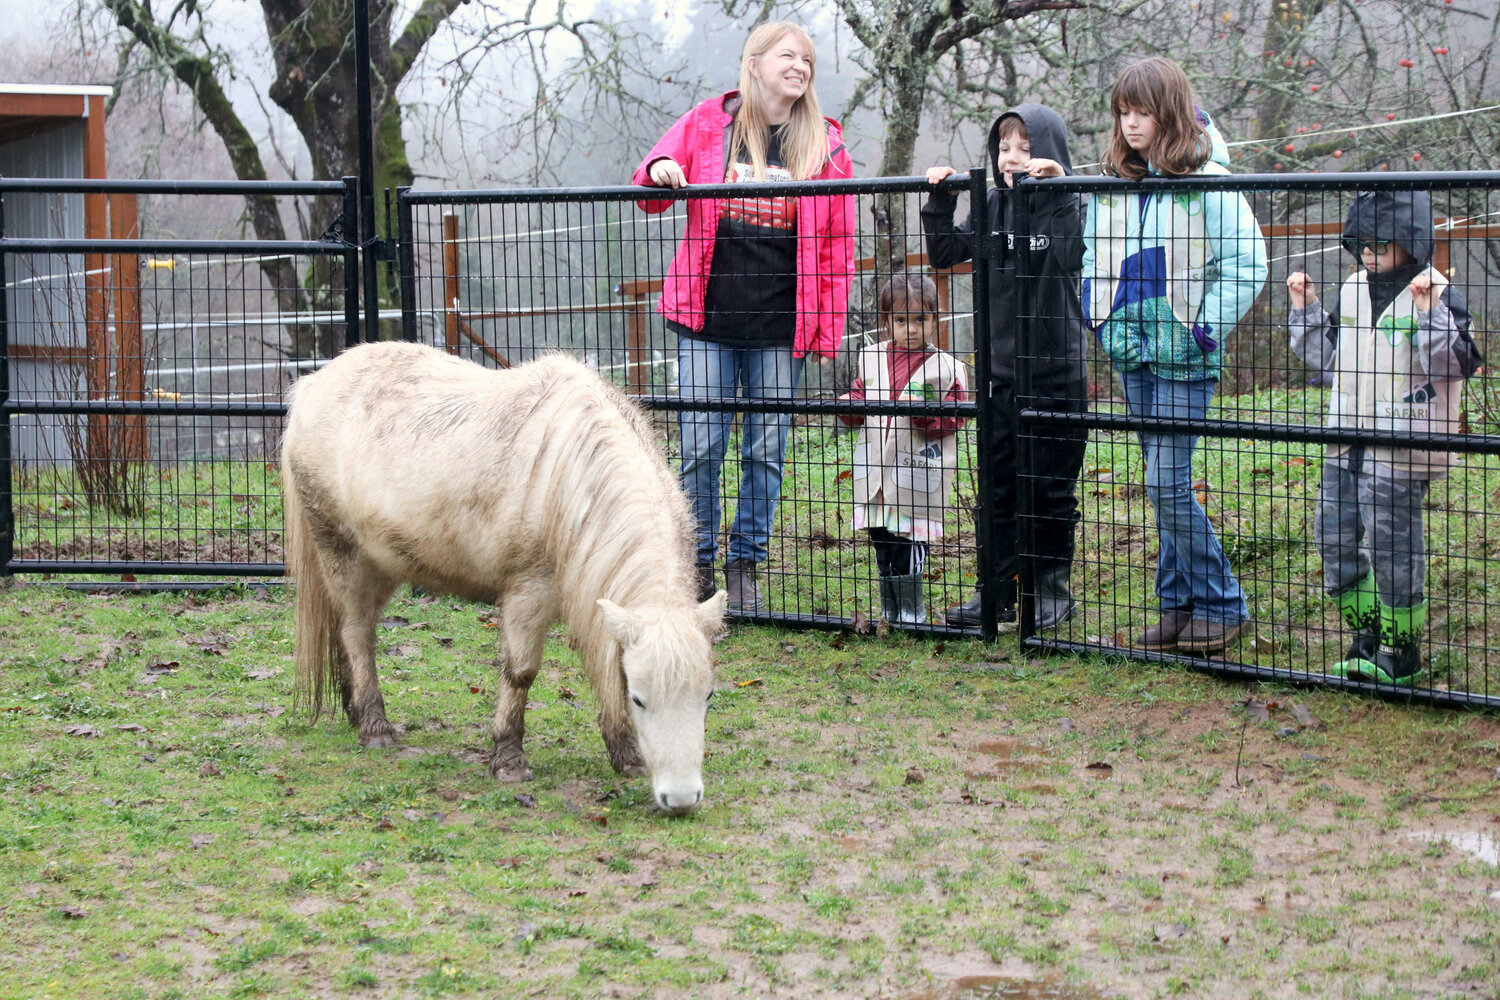 Sweet Tomatoes Learning Center Executive Director Kathleen Reed and her students watch a pony graze at the center’s property in Chehalis on Wednesday, Dec. 6.